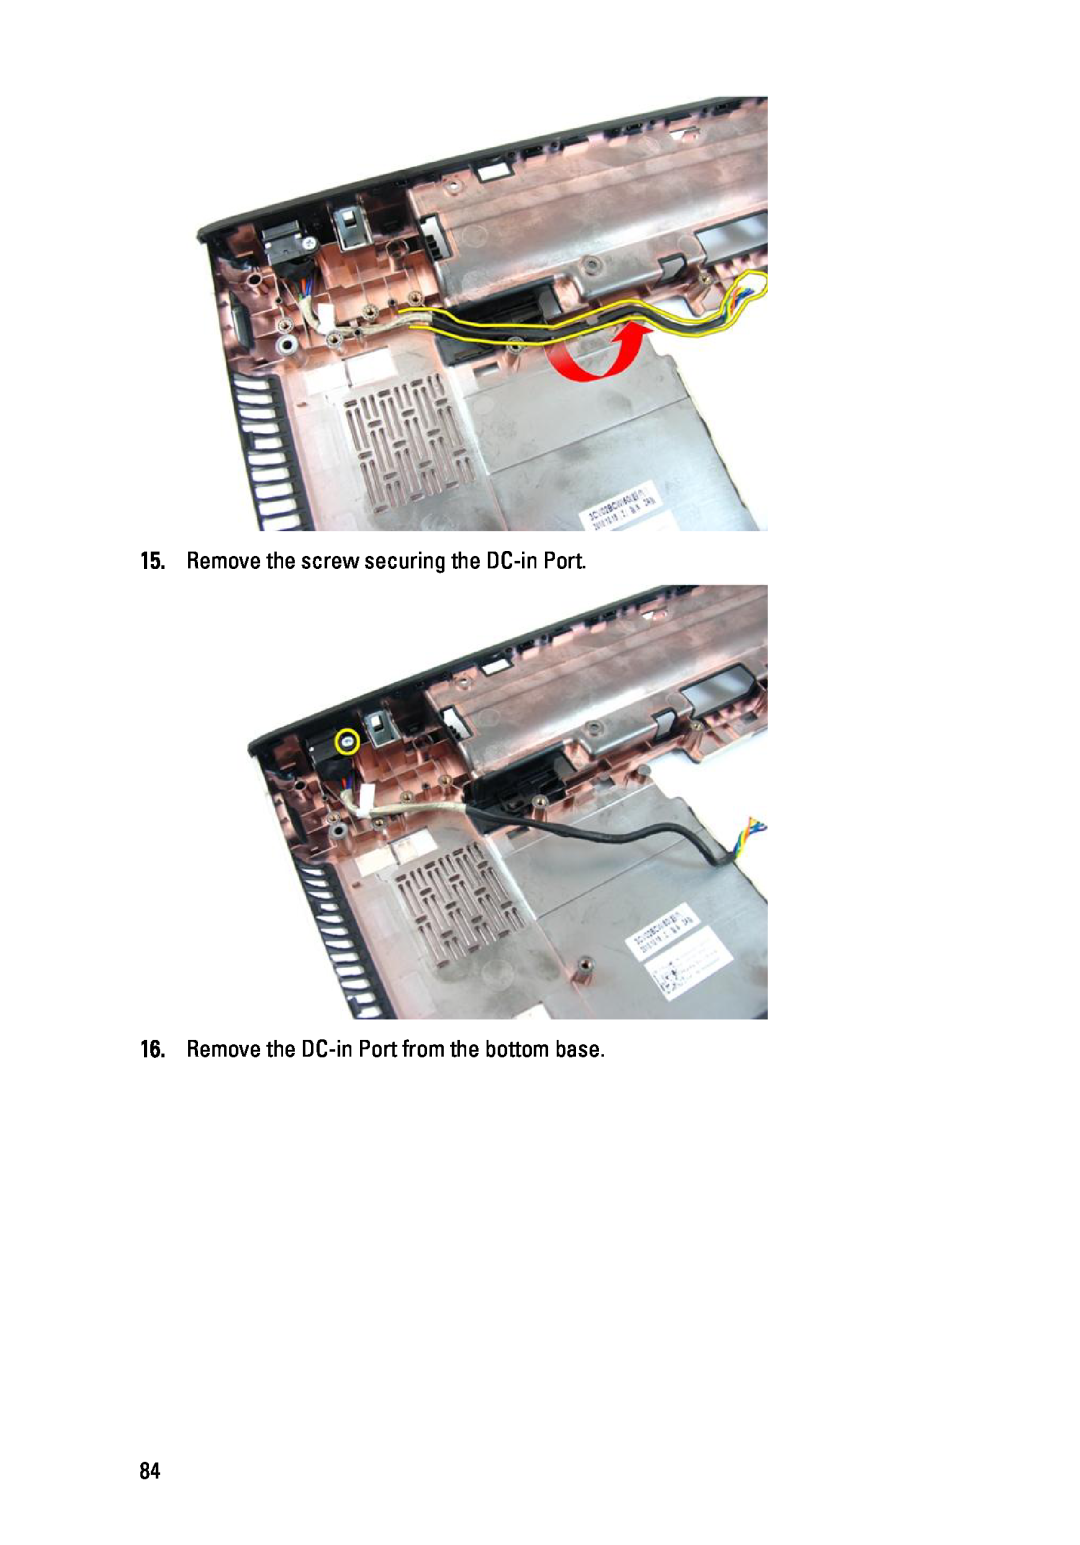 Dell 3450 owner manual Remove the screw securing the DC-in Port, Remove the DC-in Port from the bottom base 